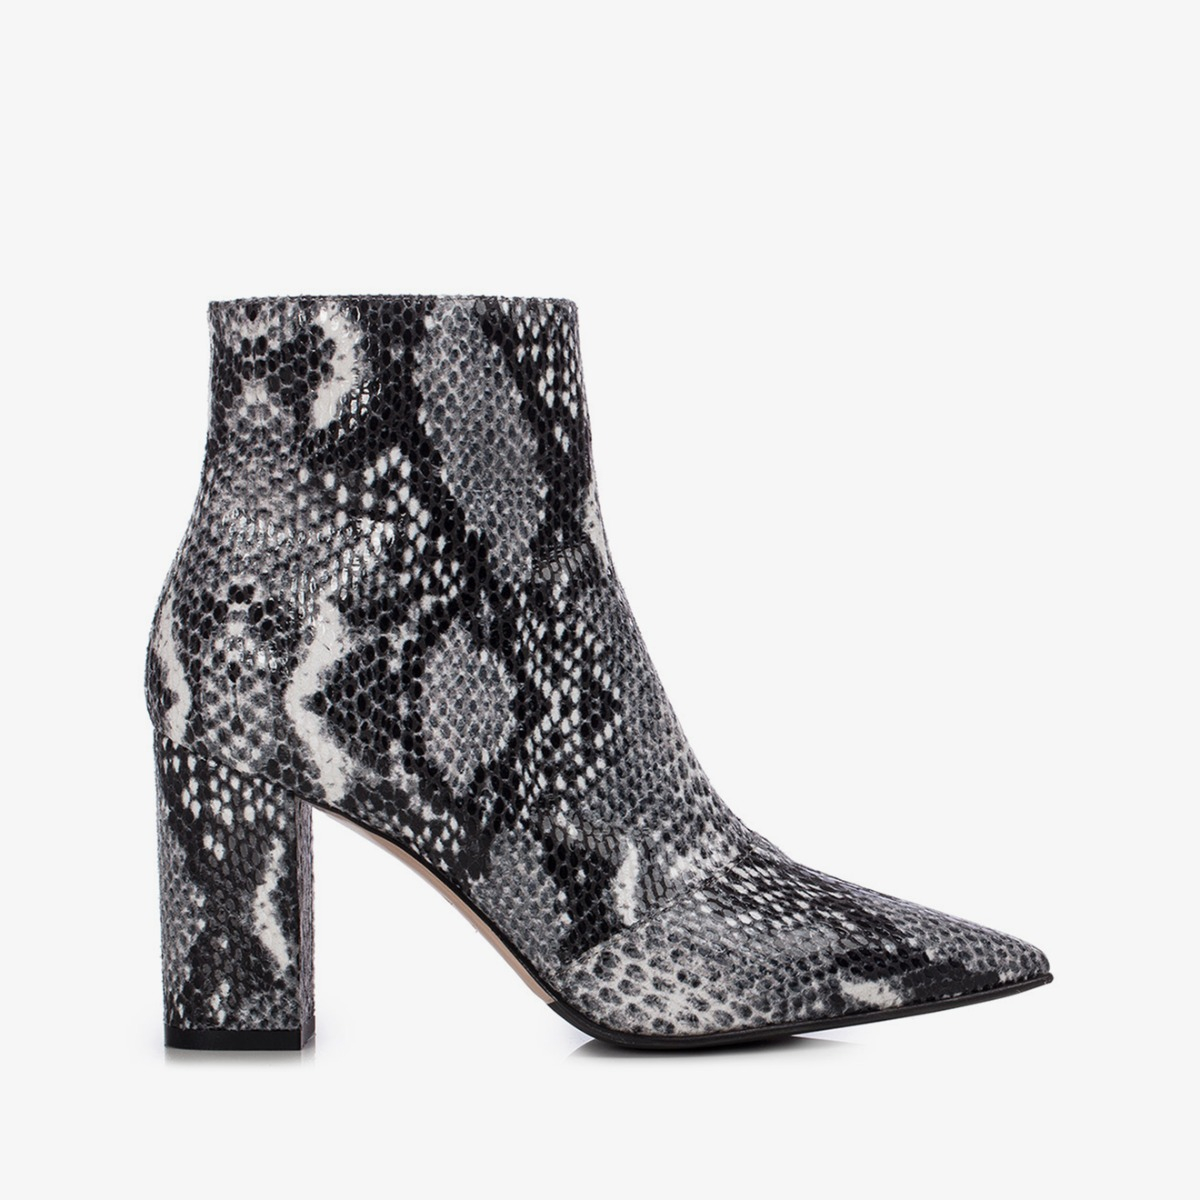 MEGAN ANKLE BOOT 80 mm - Le Silla official outlet